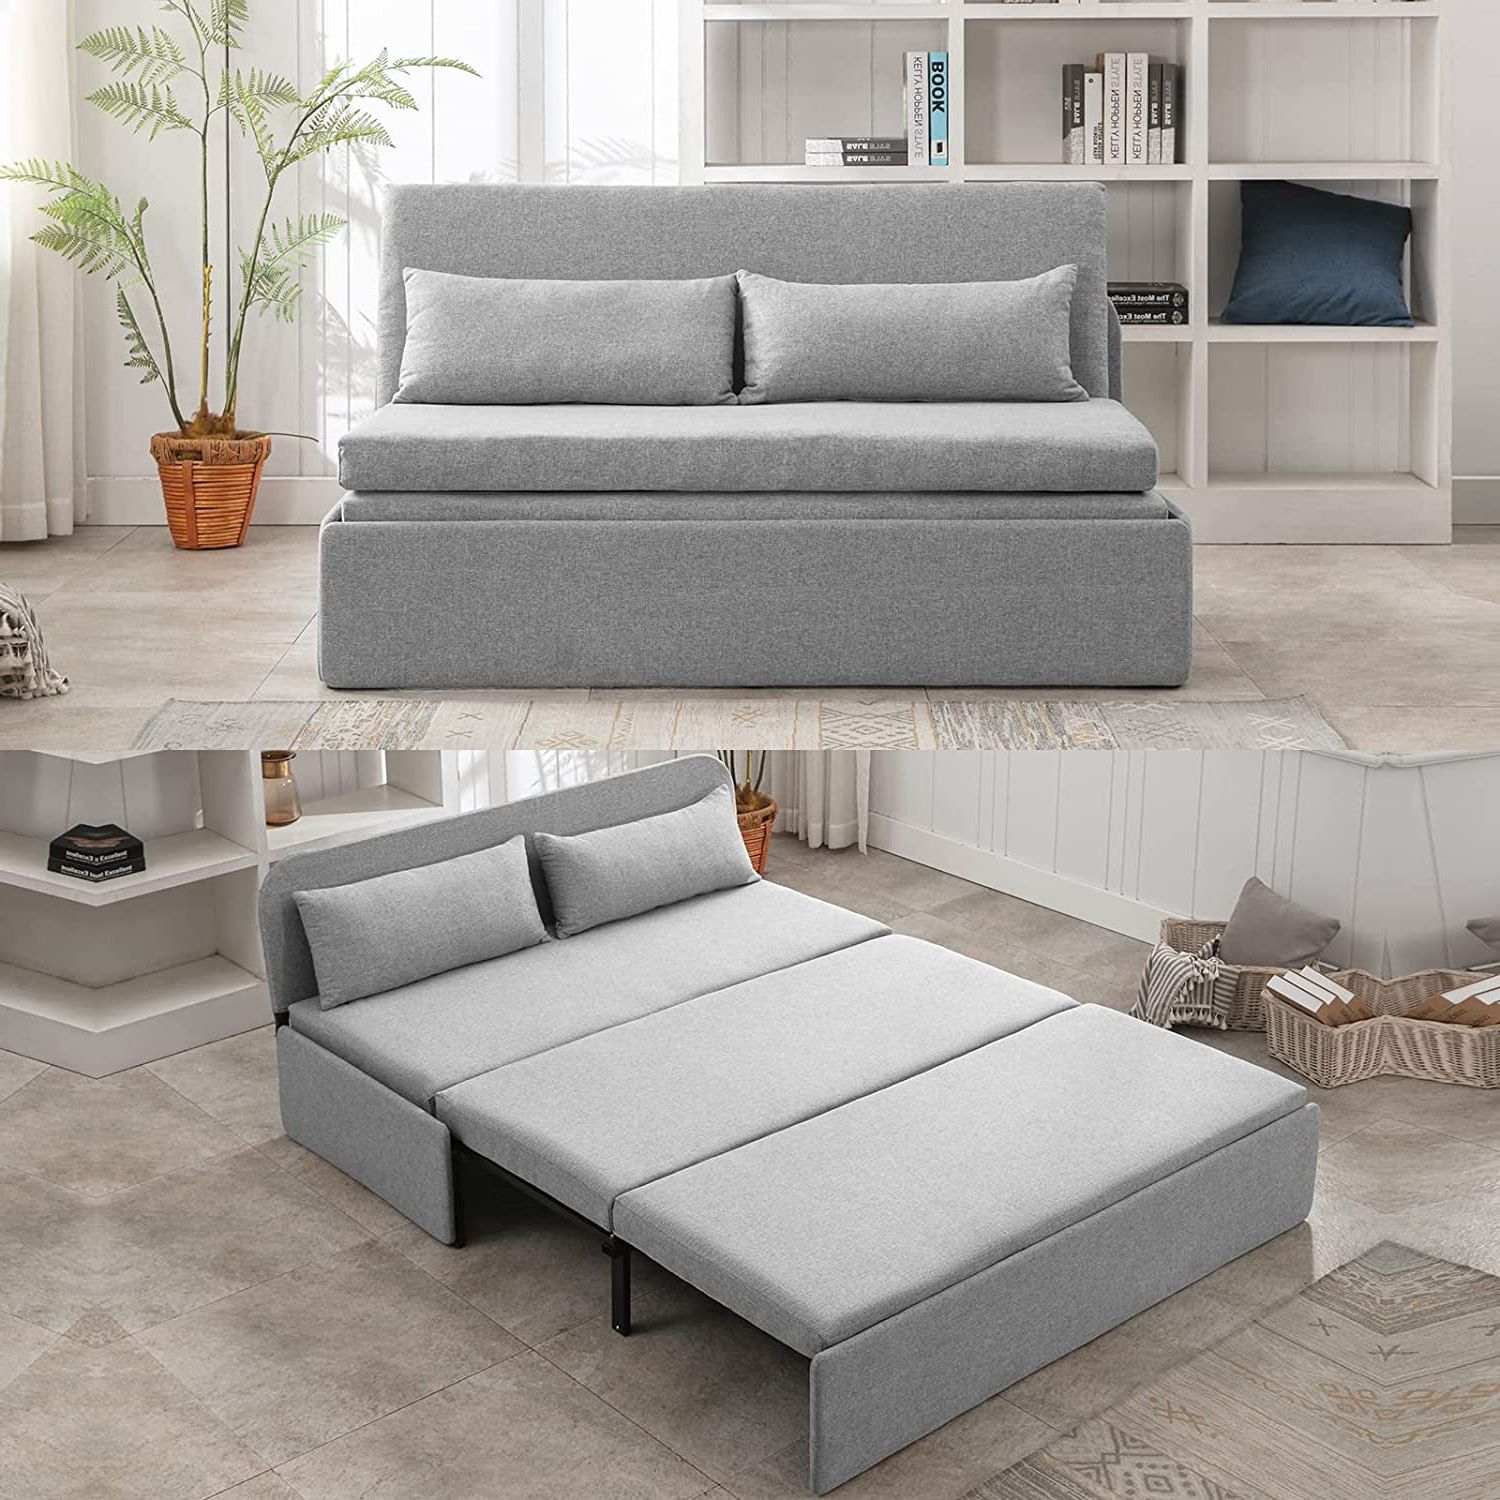 Mjkone Twin Size Convertible Sofa Bed, Modern Pull Out Linen Sleeper Sofa  Couch, Revesible Couch Bed With Cushions&throw Pillows For Small  Place/apartment/living Room/office/studio(light Gray) – Walmart Intended For Pull Out Couch Beds (View 6 of 20)